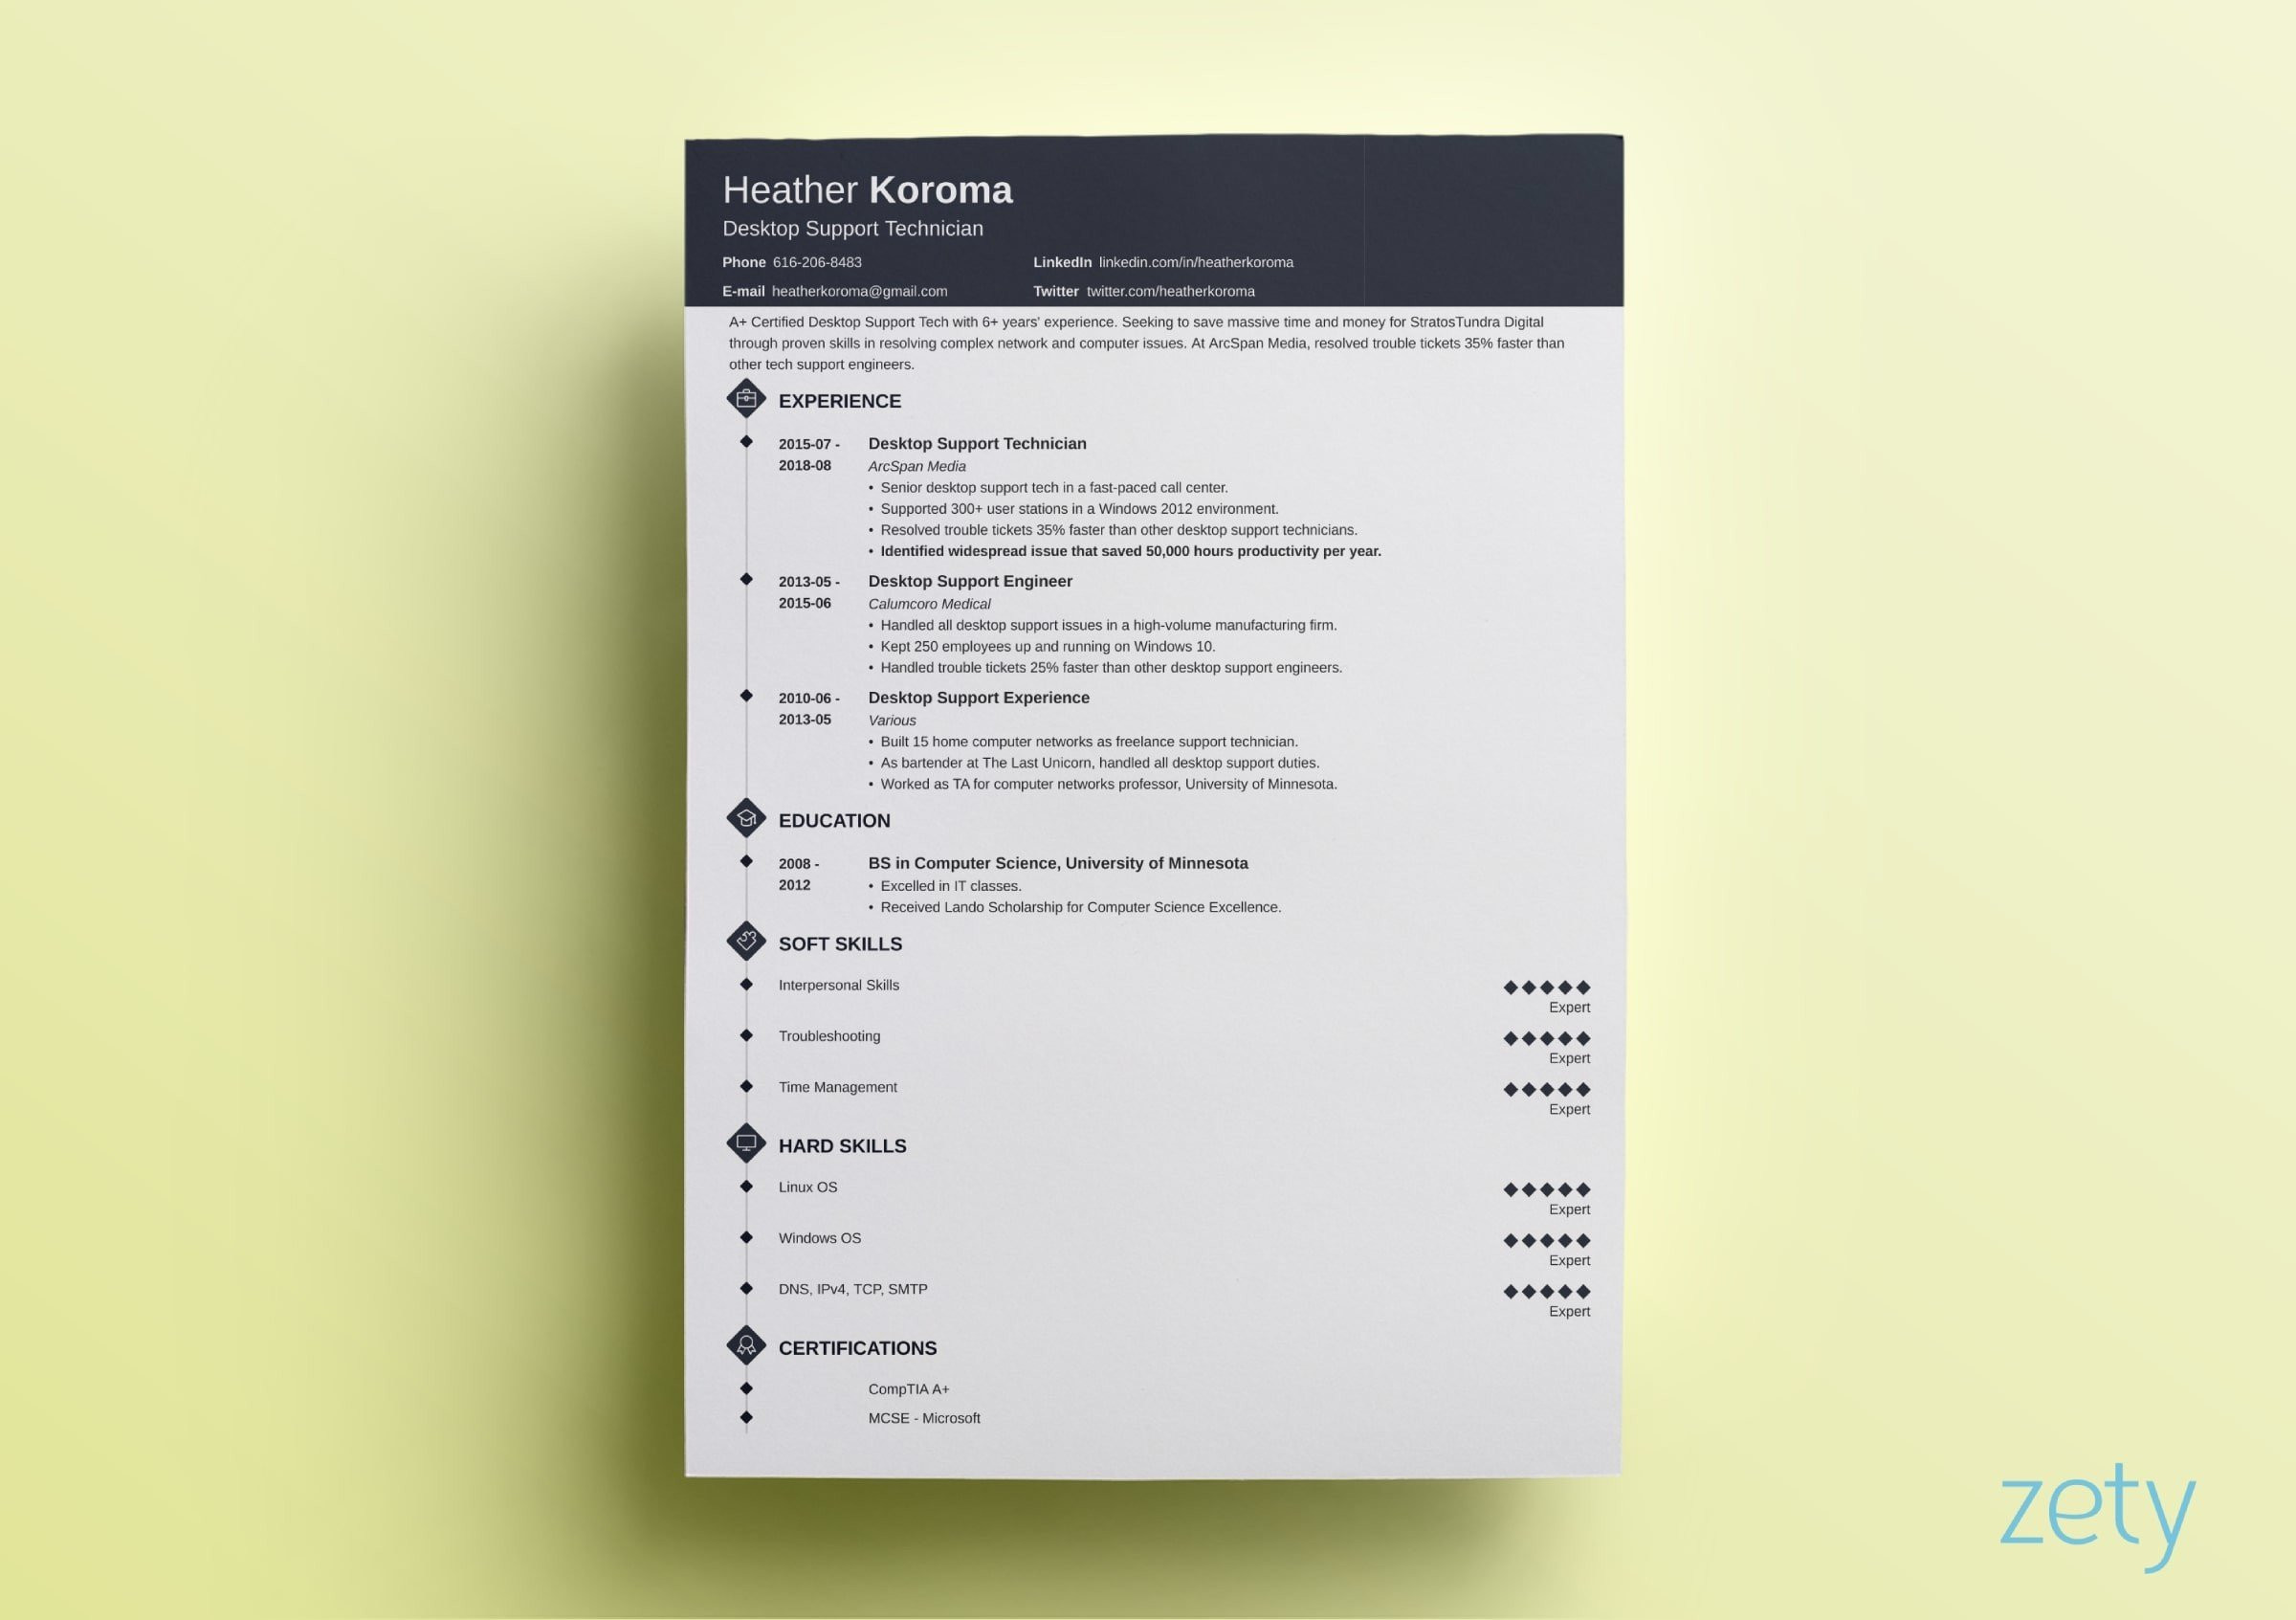 Resume Template with Only One Job 15 One Page Resume Templates [examples Of 1 Page format]